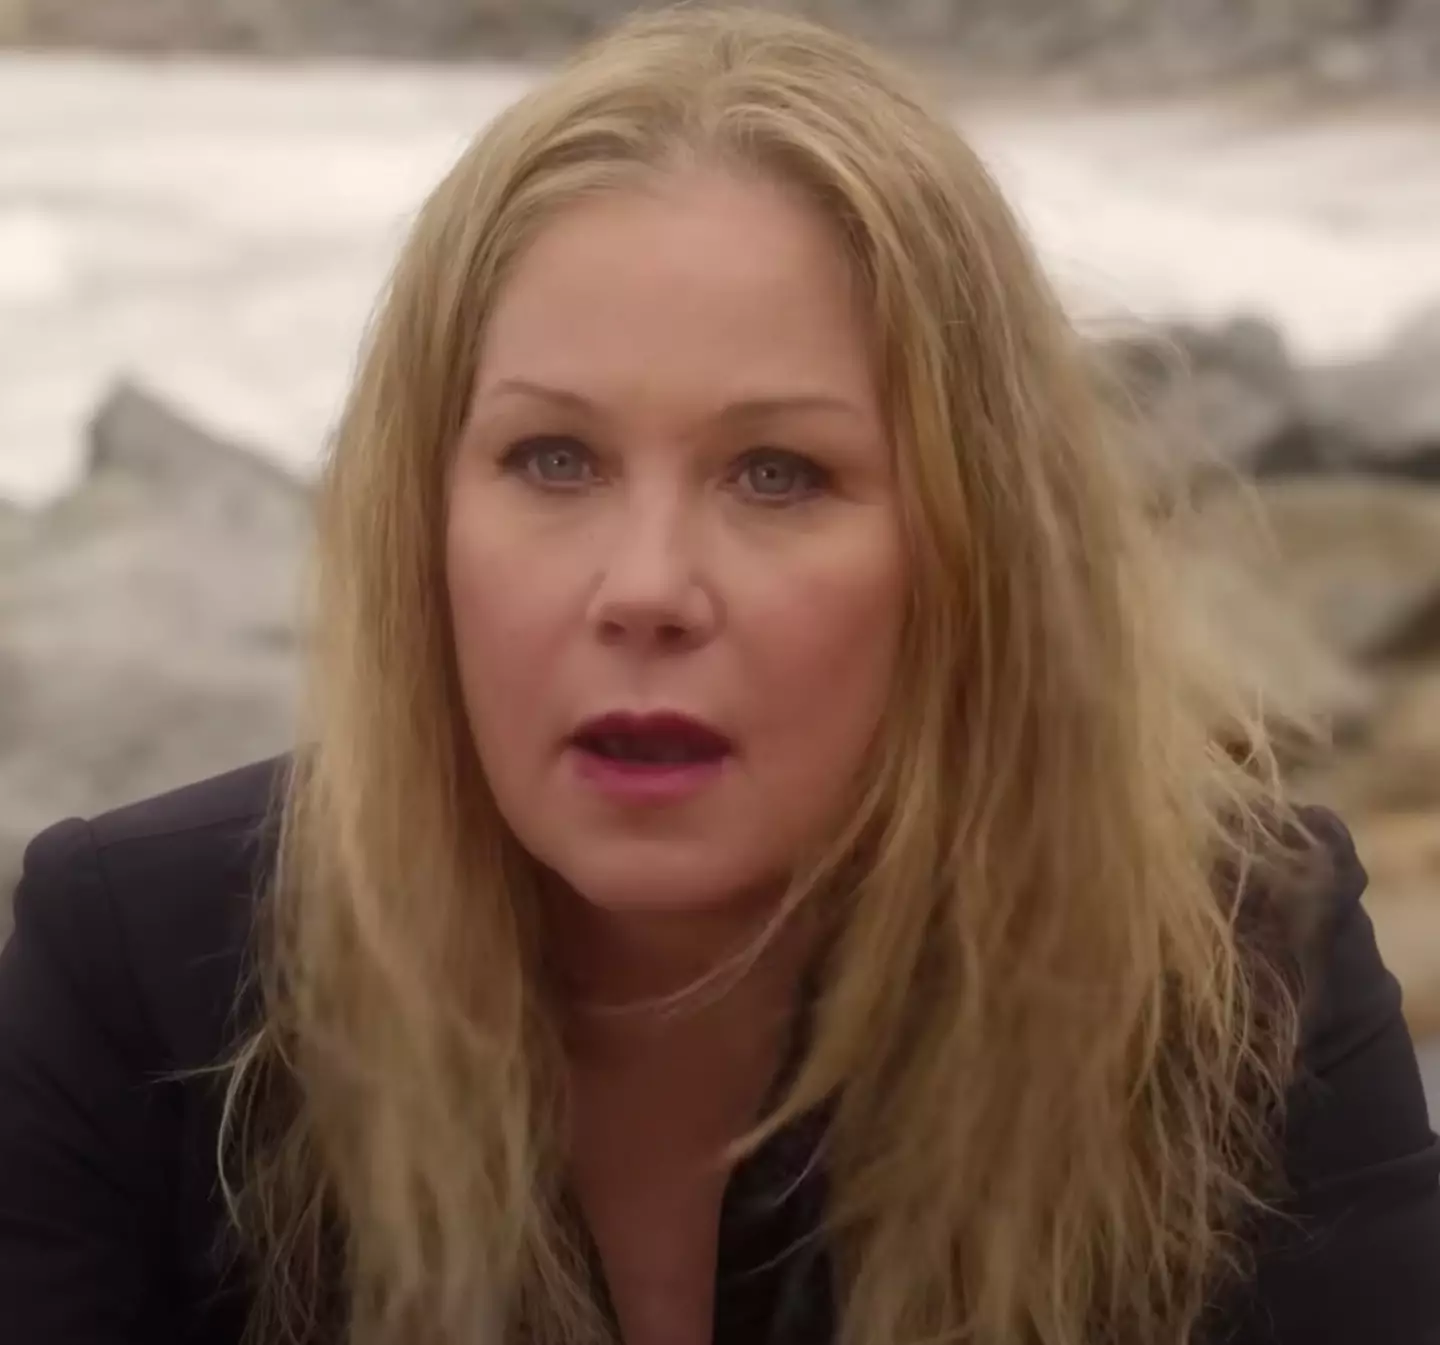 Christina Applegate says Dead to Me will likely be her last acting role.